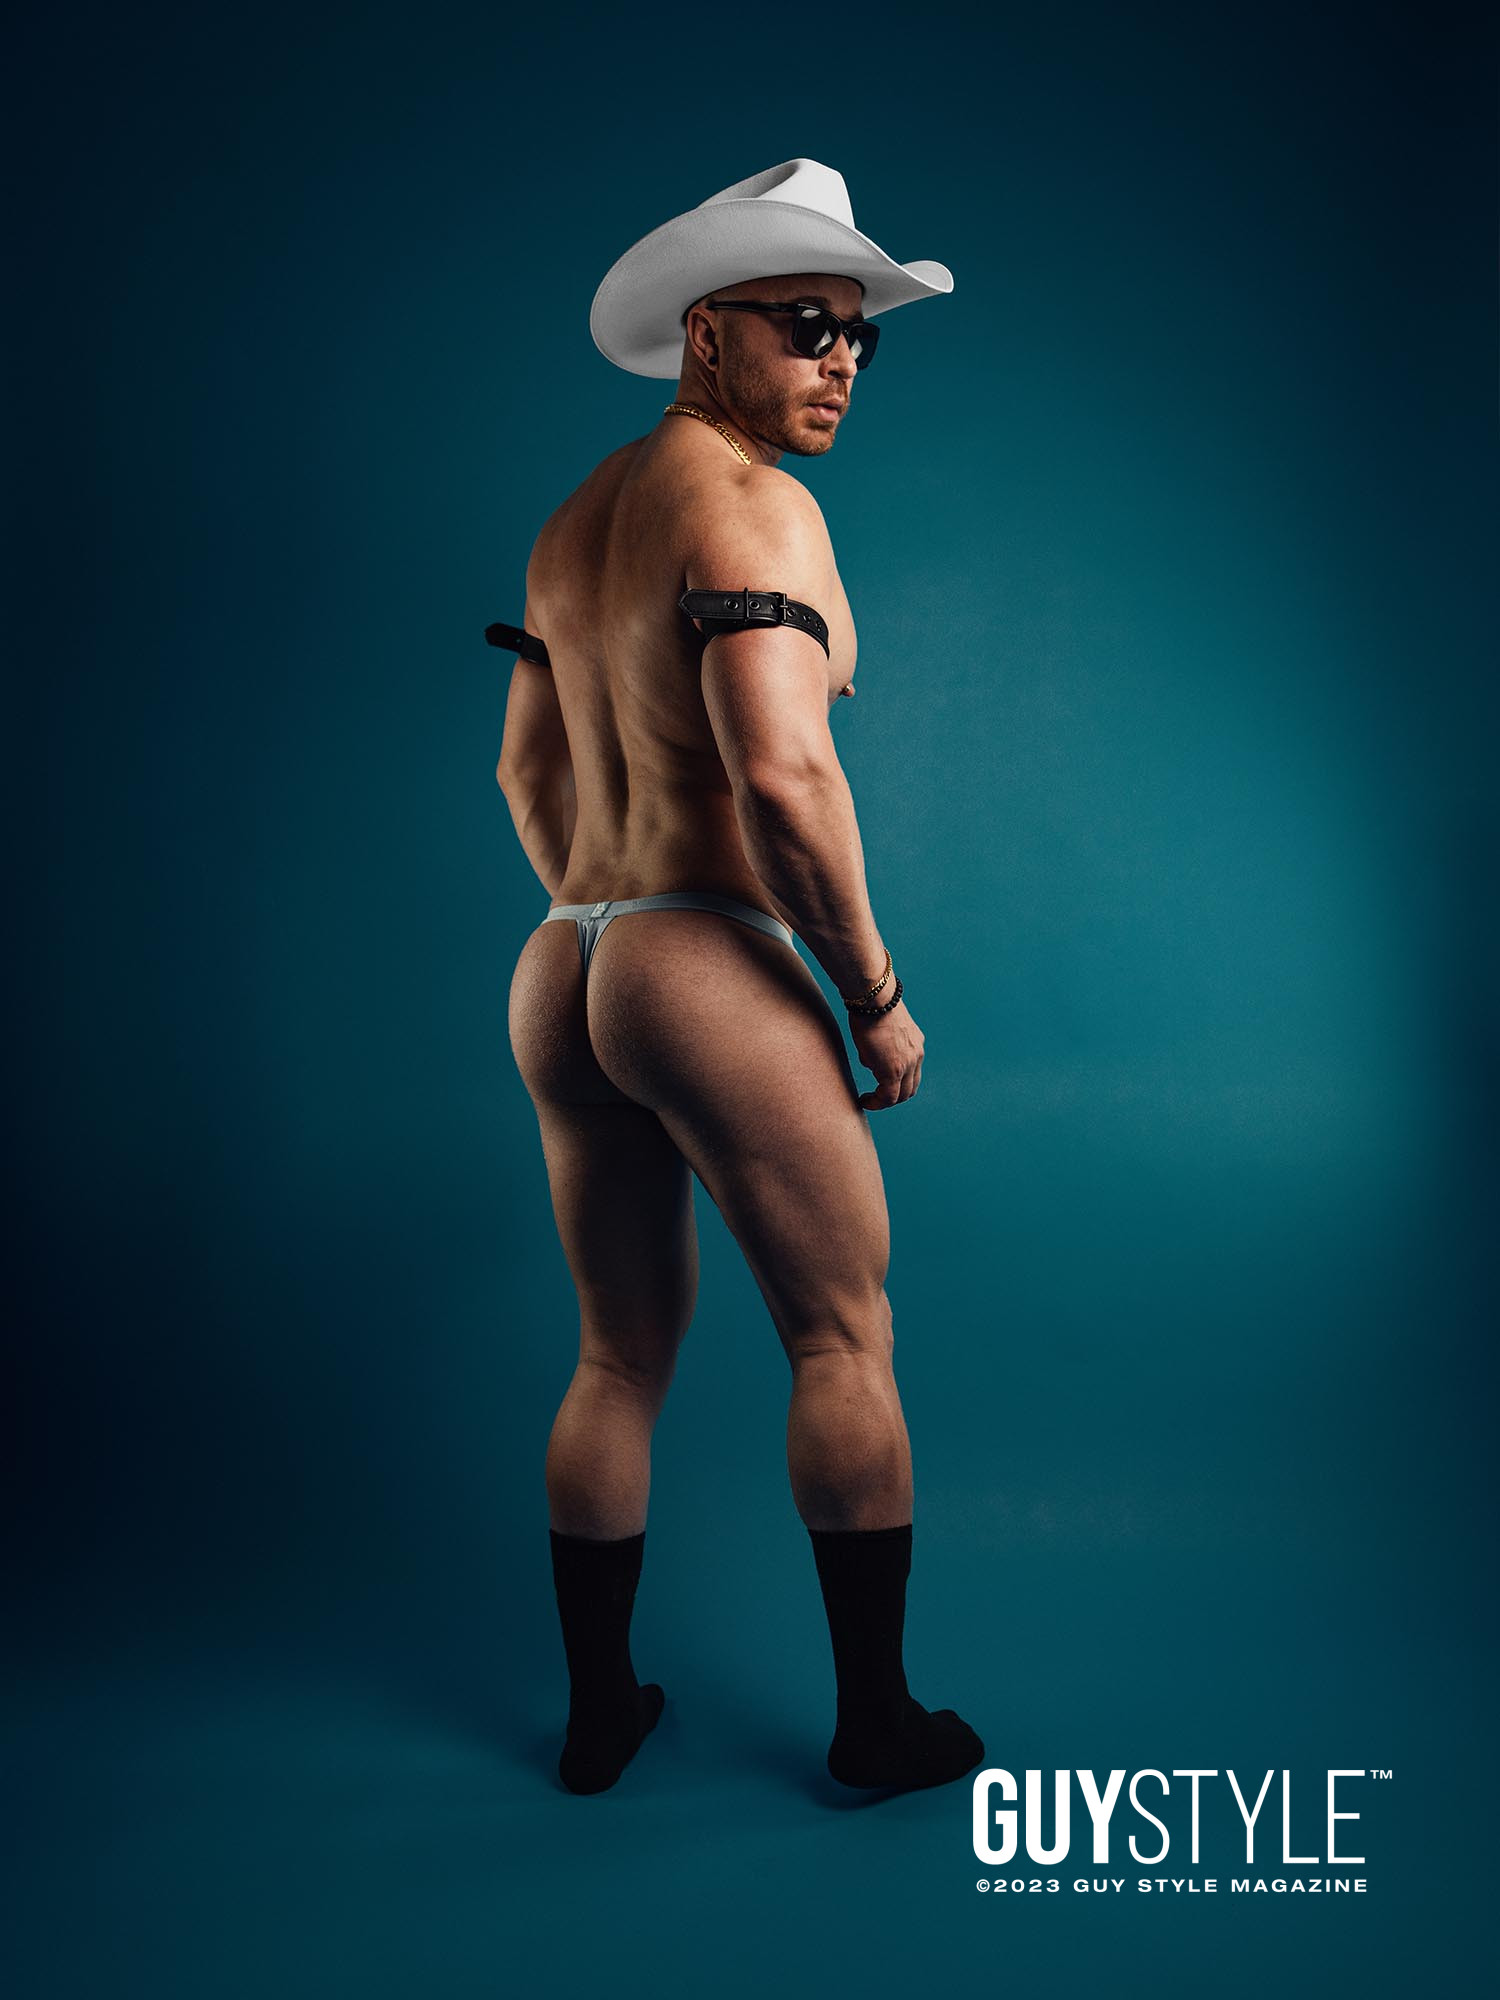 Teal Temptation – NYC Male Boudoir Experience Photoshoot by Male Boudoir Photographer Maxwell Alexander Starring Cocky Cowboy